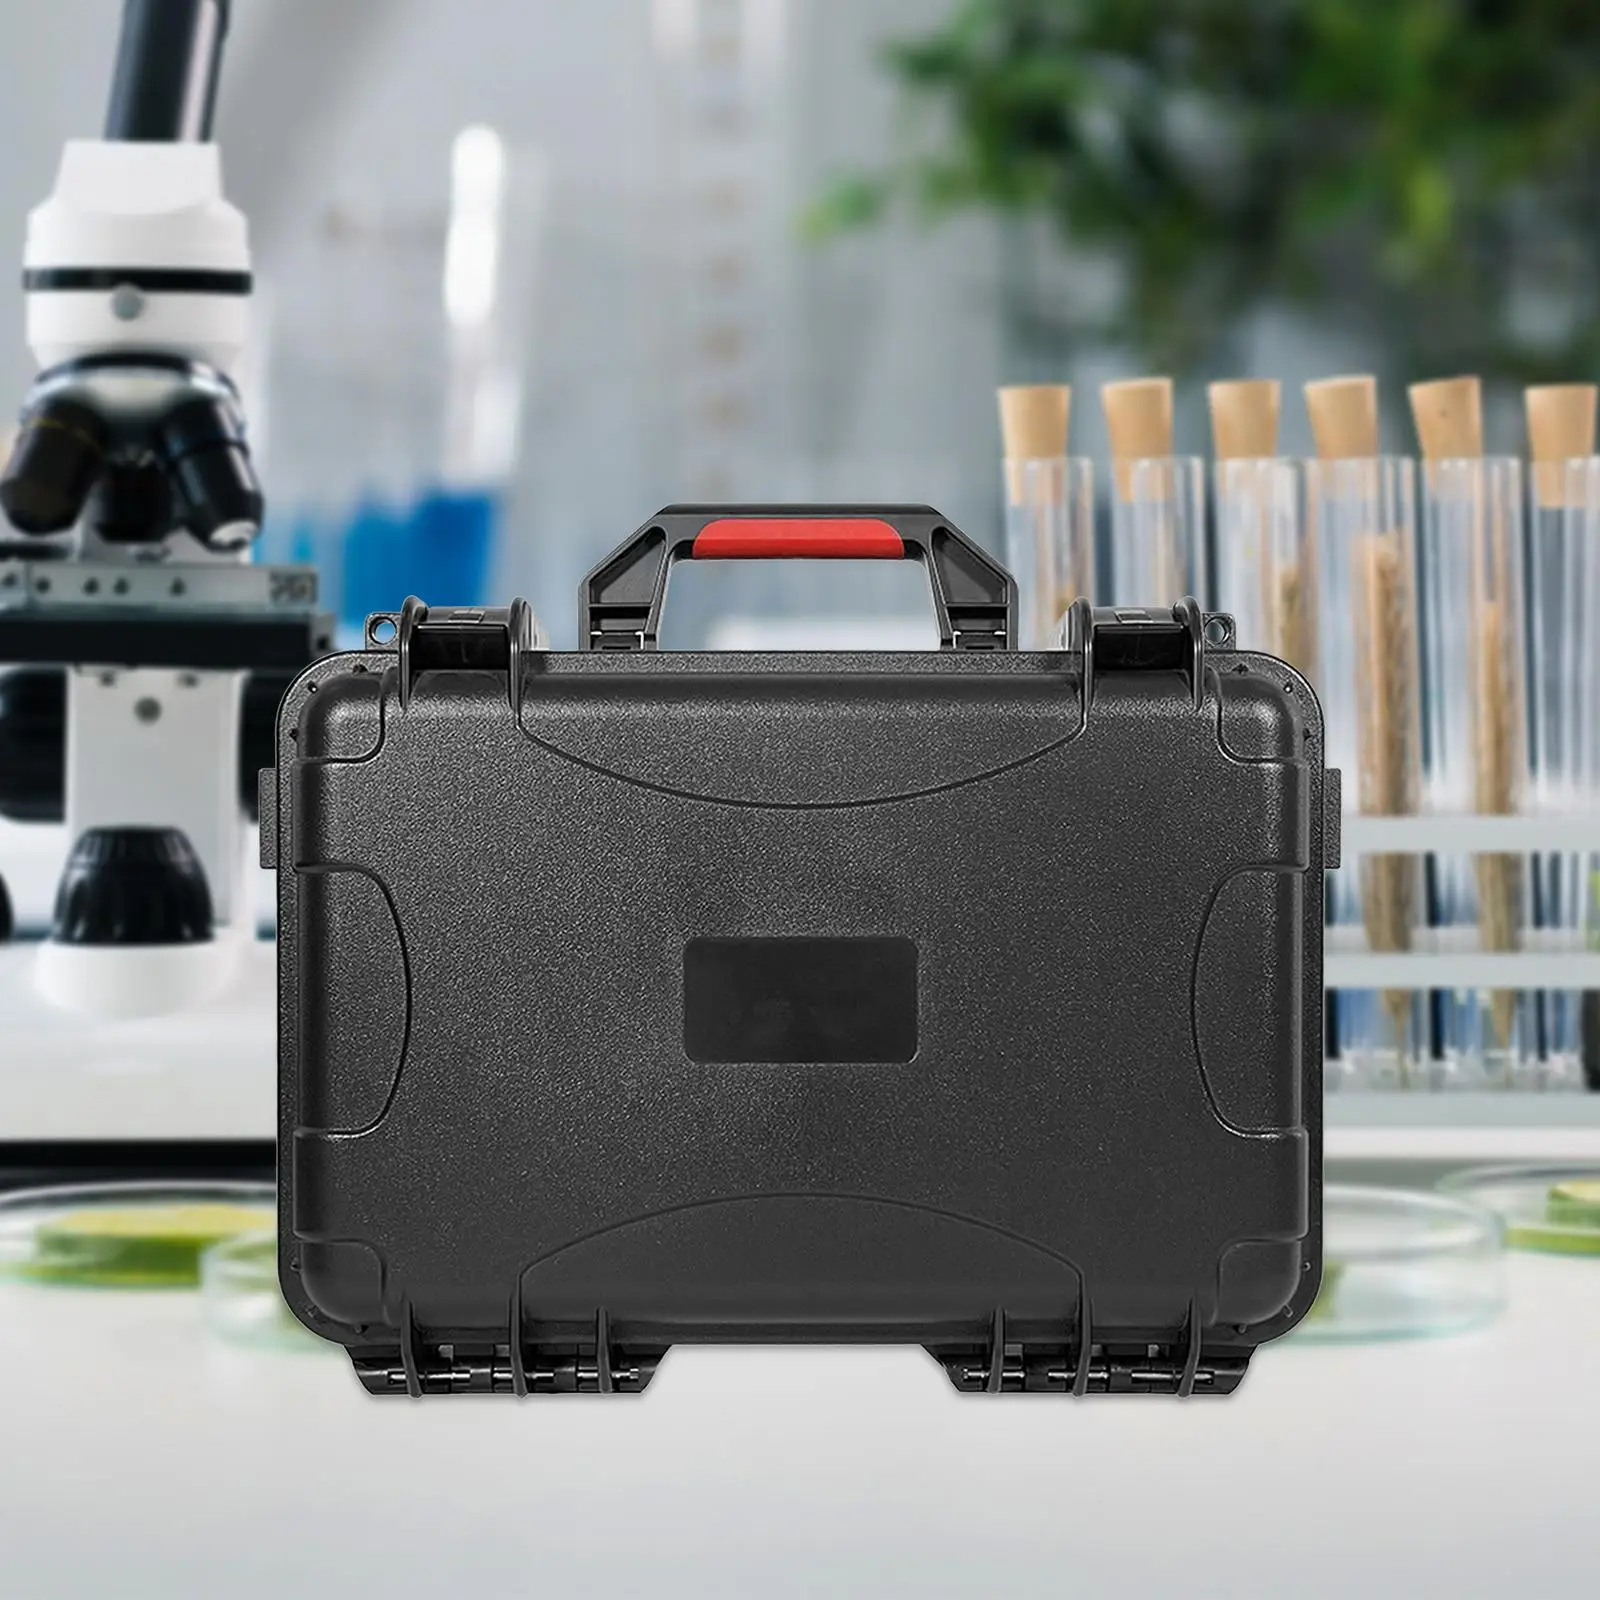 Multifunction Organizer Tool Box Protect Toolbox Protective for